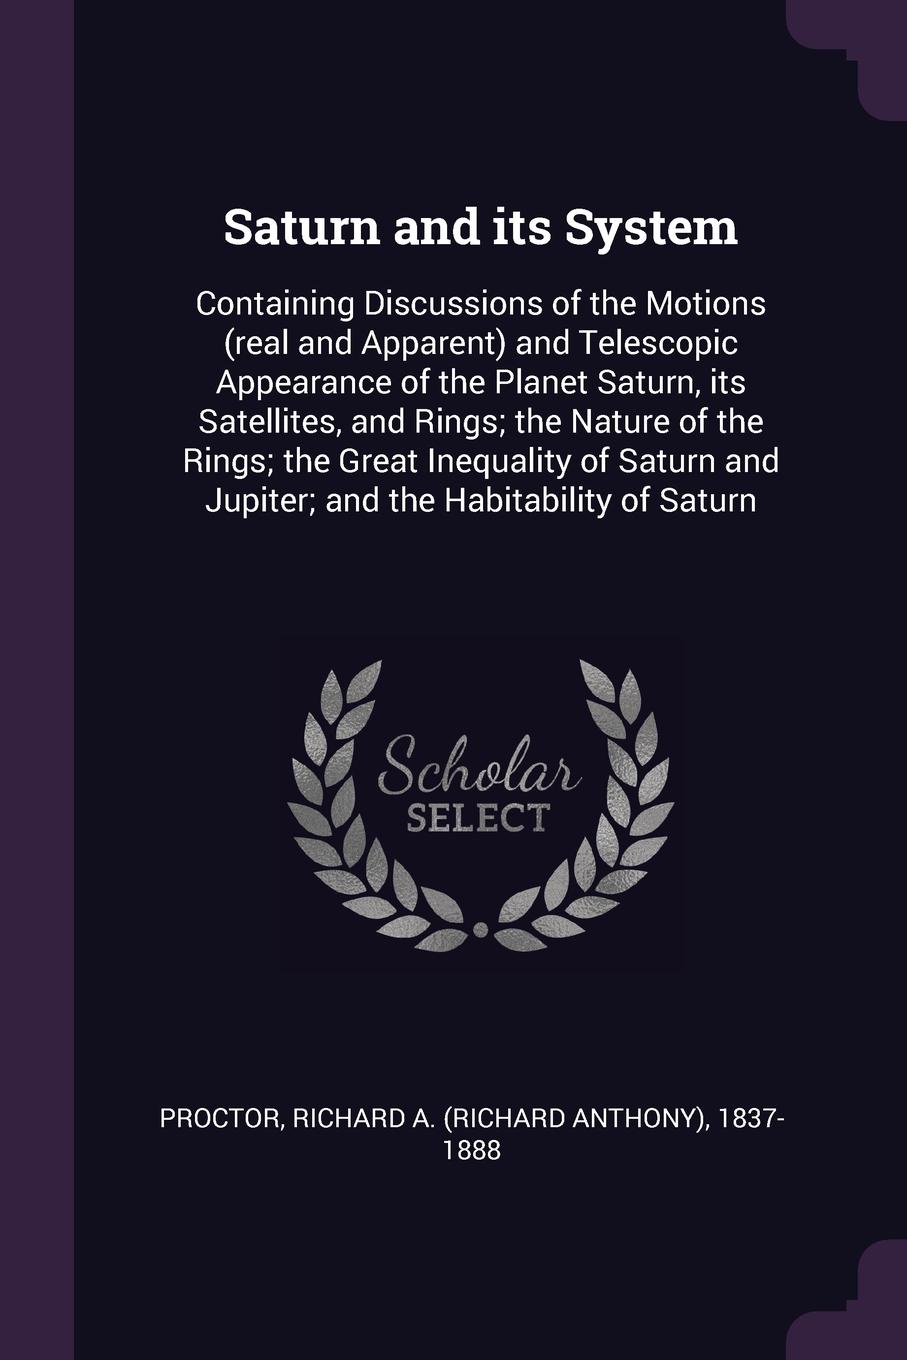 Saturn and its System. Containing Discussions of the Motions (real and Apparent) and Telescopic Appearance of the Planet Saturn, its Satellites, and Rings; the Nature of the Rings; the Great Inequality of Saturn and Jupiter; and the Habitability o...